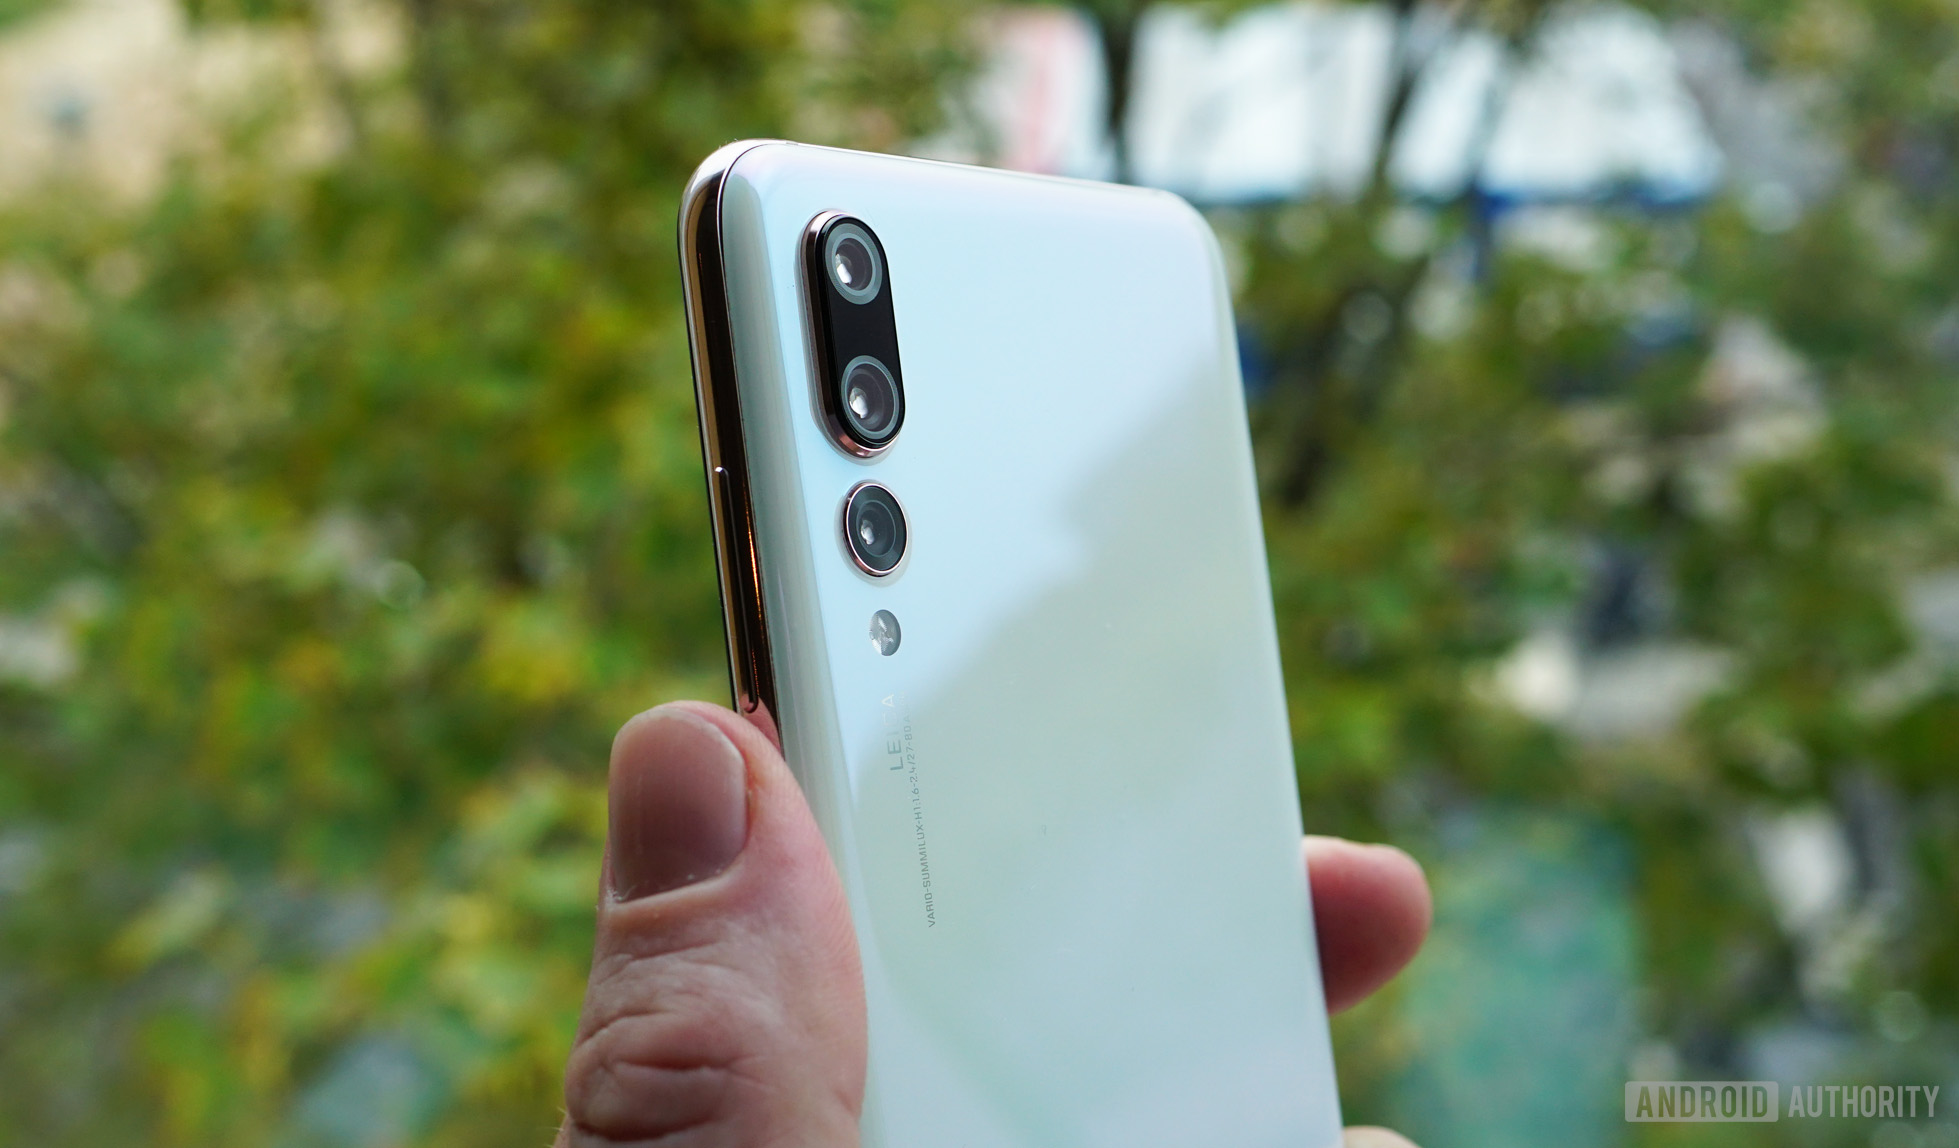 The Huawei P20 Pro in pearl white.